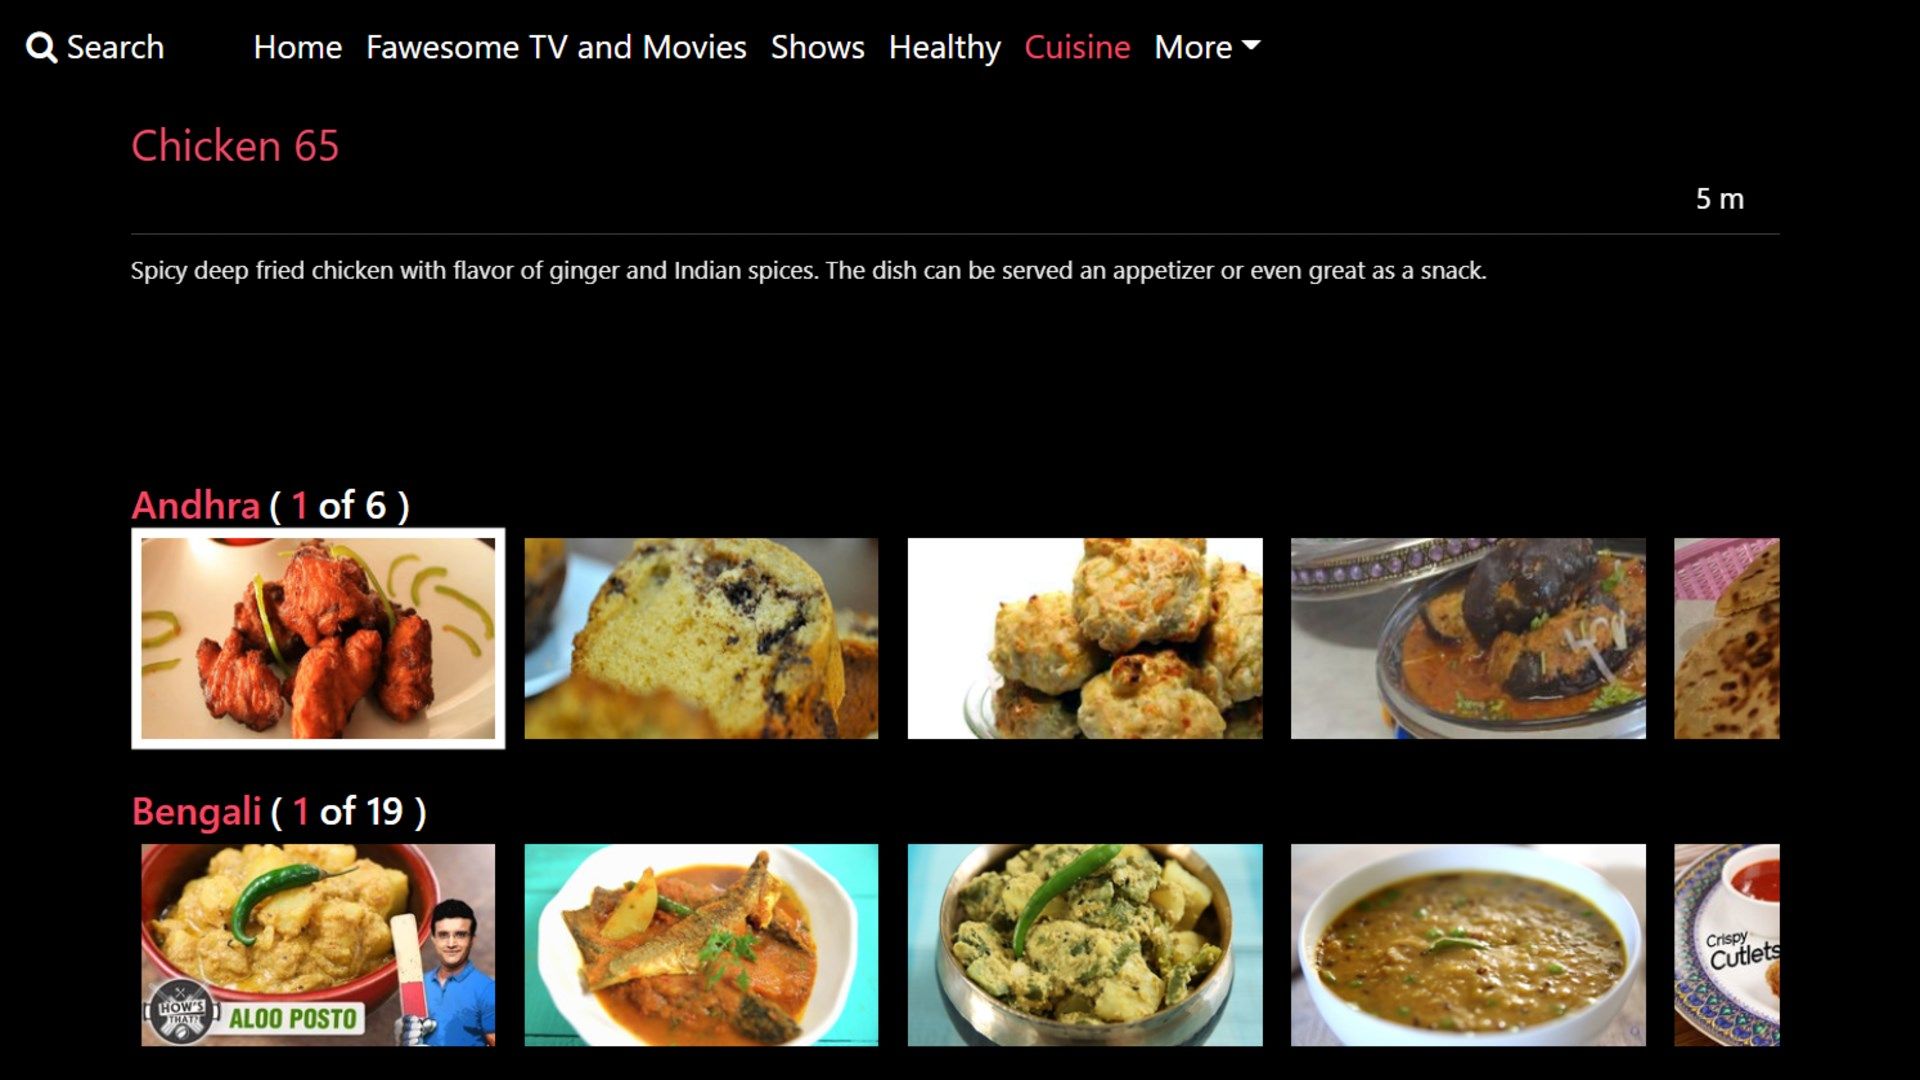 Indian Recipes by iFood.tv